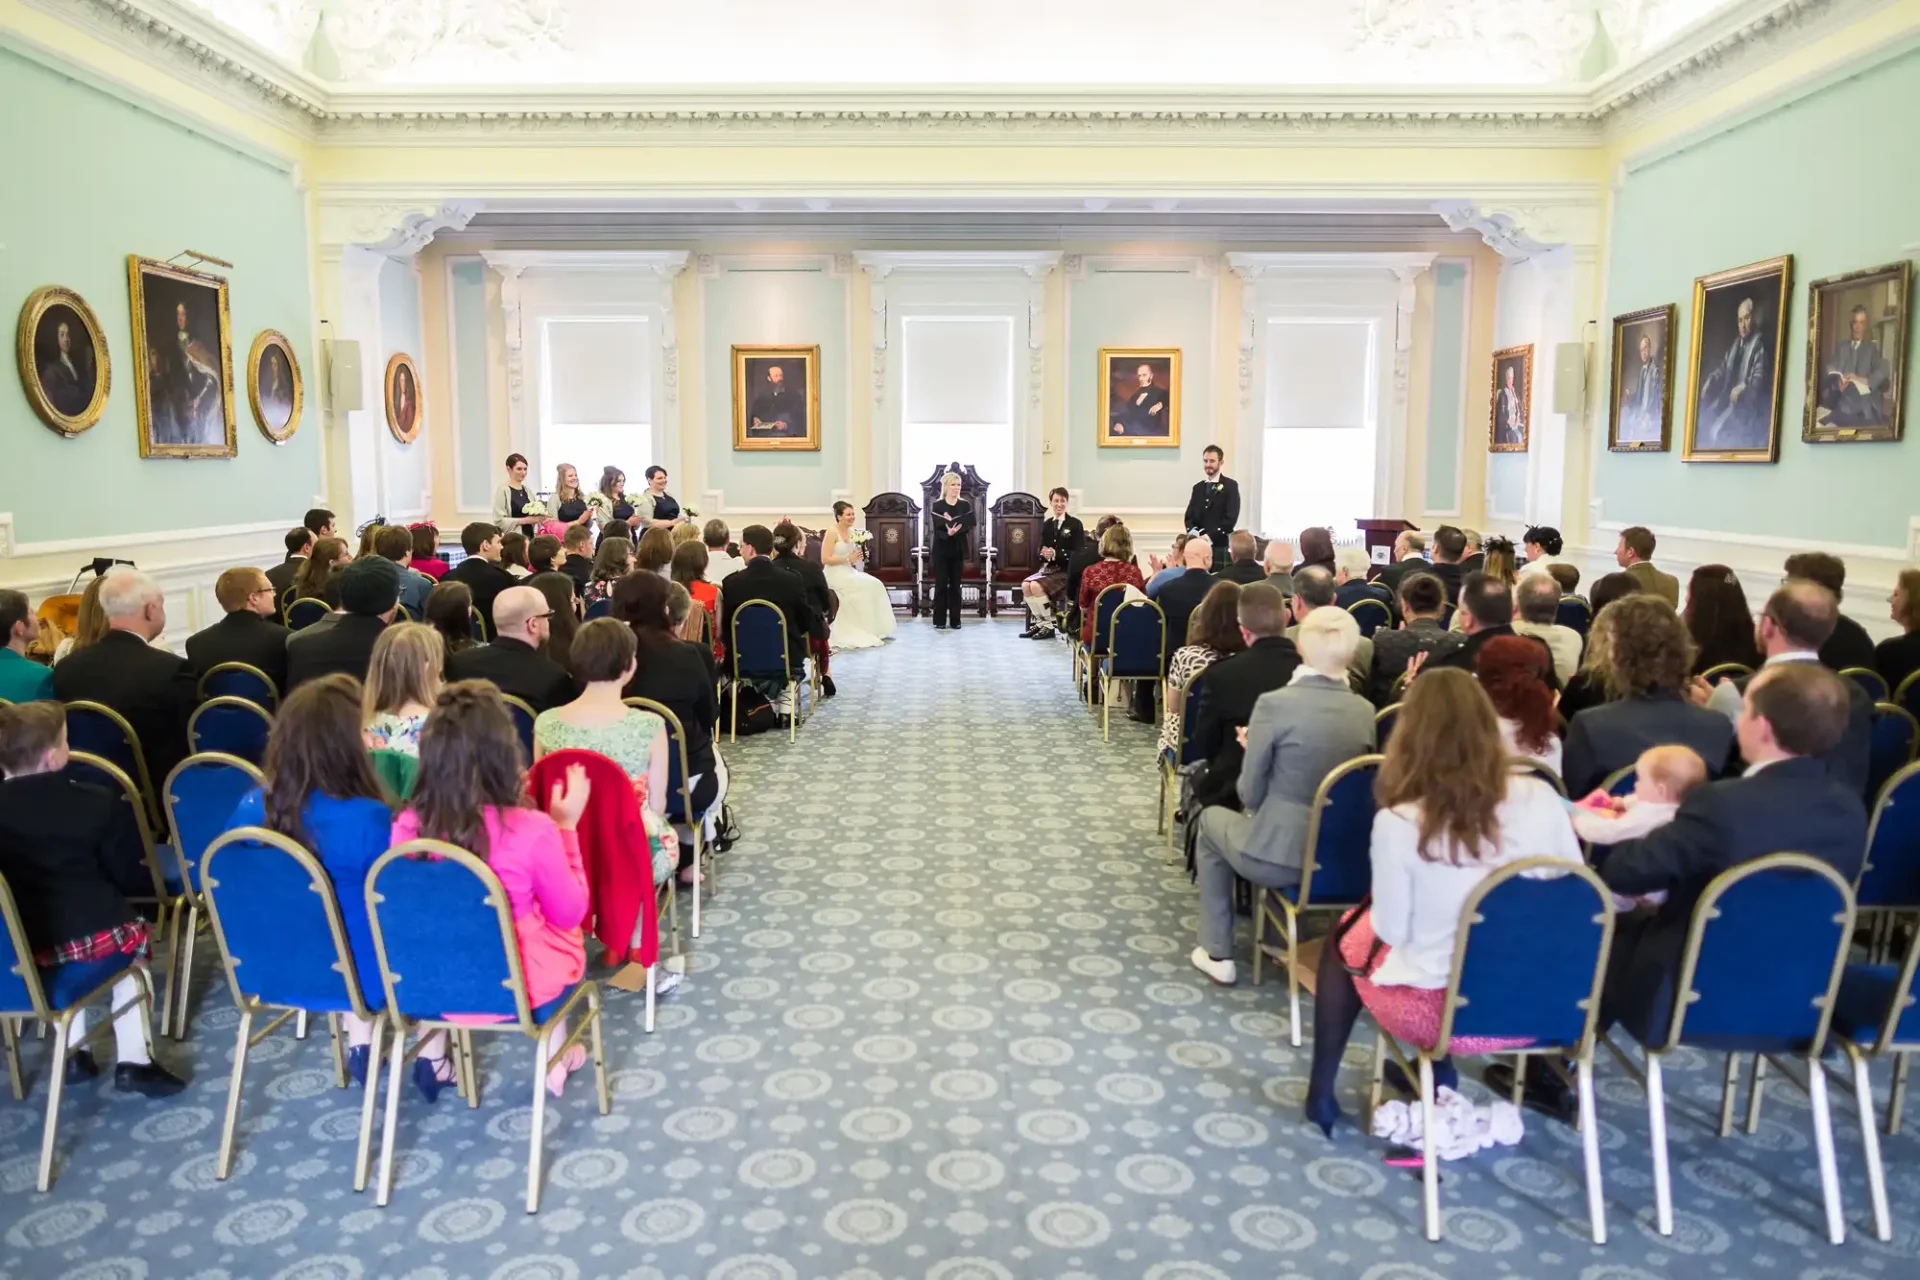 Wedding ceremony in an elegant room with seated guests, bride and groom at the front, and portraits on the walls.